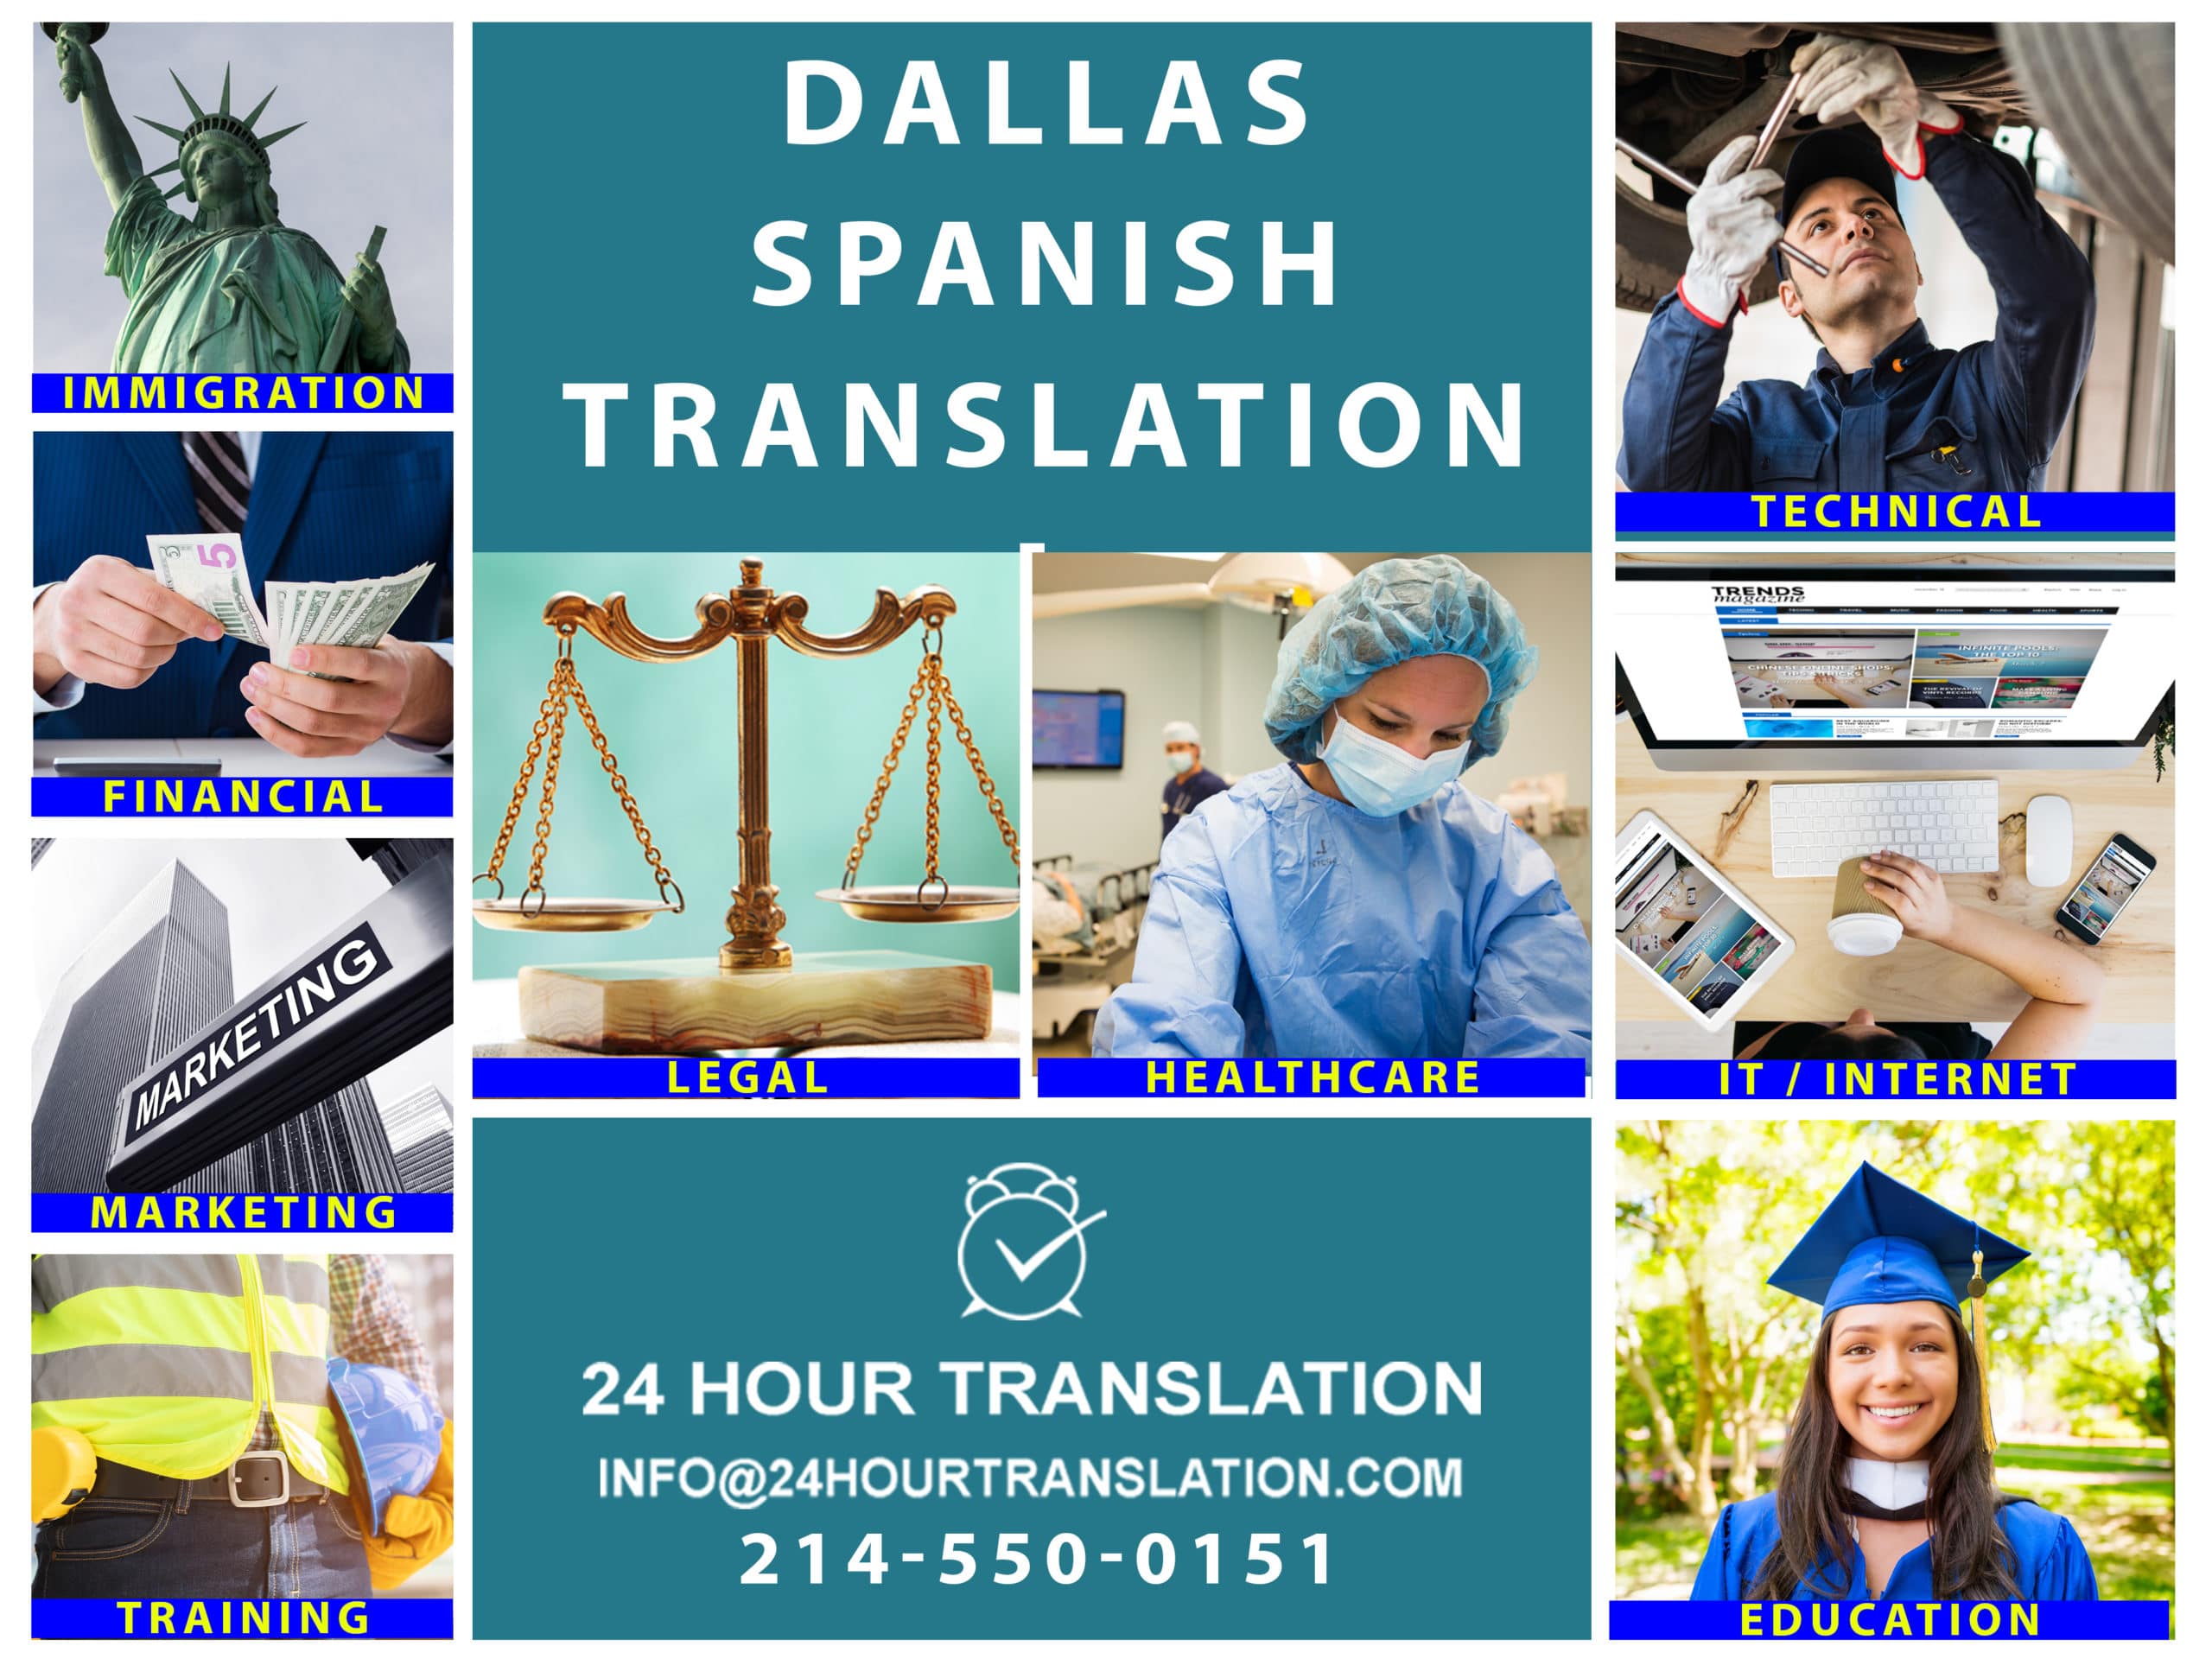 Do you need Spanish professional and certified translation services near Dallas?  Our Spanish translators deliver accurate and low-cost translations that communicate your message professionally and can be certified for USCIS, local and federal courts, and other official purposes.  Our Spanish translations can also be certified and notarized to meet medical and healthcare, financial and banking requirements, immigration, college admission and licensing requirements.  For professional translations, we have some of the most experienced and technically competent Spanish translators in Dallas.  Our Spanish document translation team consists of engineers, doctors, managers, and lawyers who are bilingual and passionate about providing high quality translations that are affordably priced and quickly delivered.  When you need to translate Spanish documents near Dallas, you can count on 24 Hour Translation. Our Dallas-Fort Worth office at 5025 Addison Circle, Addison, Texas, is ready to serve you.  For immigration, we translate birth certificates, marriage certificates, divorce decrees, driver’s licenses.  We also translate diplomas and transcripts for college and university admission.  Our financial translations are accepted by leading banks, government agencies and court systems.  We are also a trusted provider of medical document translation. Businesses trust us to translate training materials, technical guides, and employee handbooks. Call 214-550-0151 to receive a free proposal.